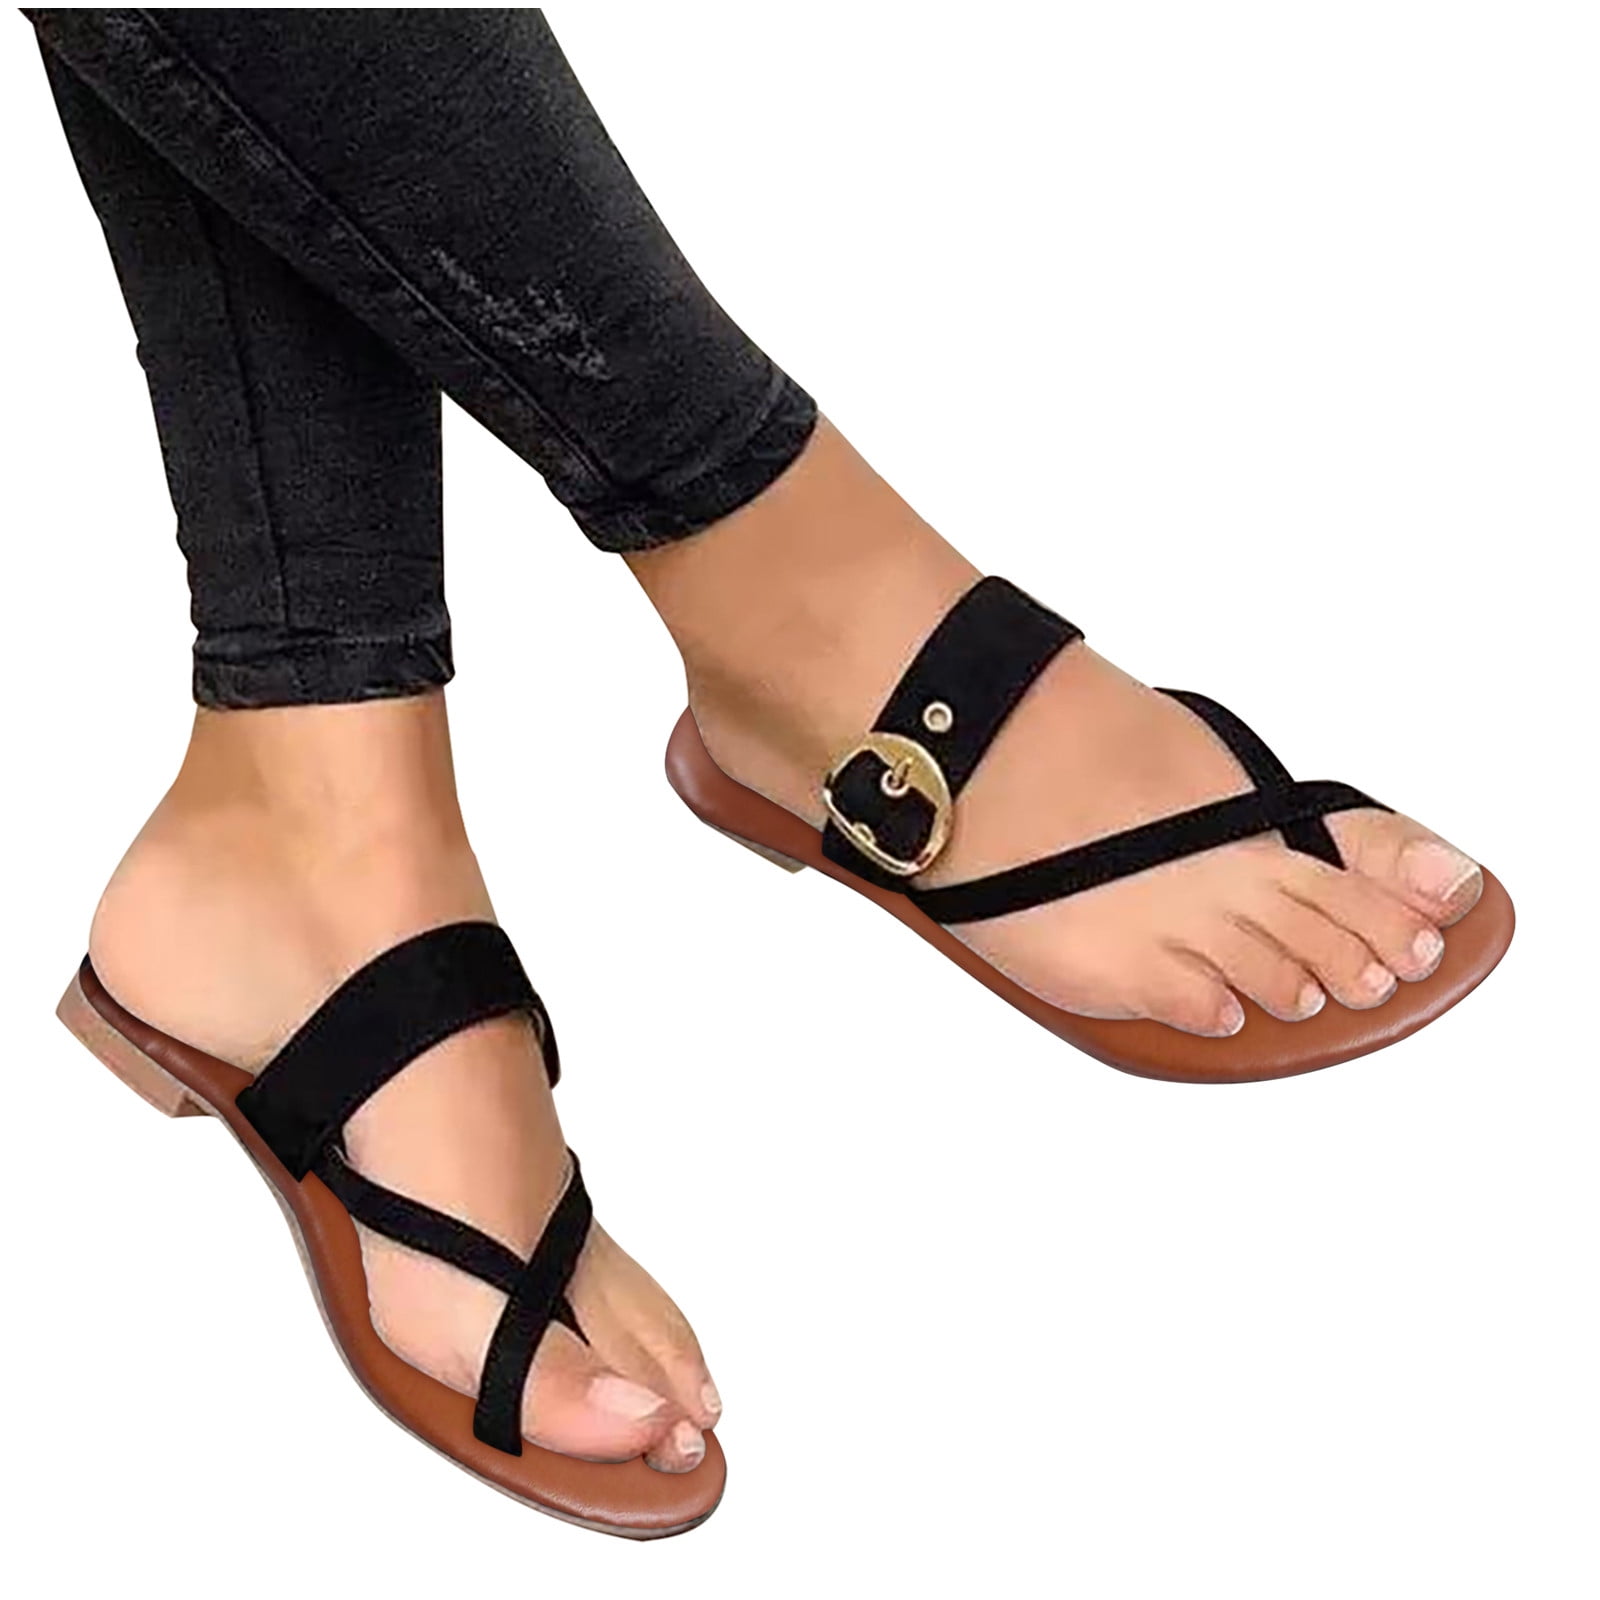 Women Shoes Sandals For Women Cross Strap Ankle Buckle Cushioned Sandals  Roman Causal Flat Shoes Black 8